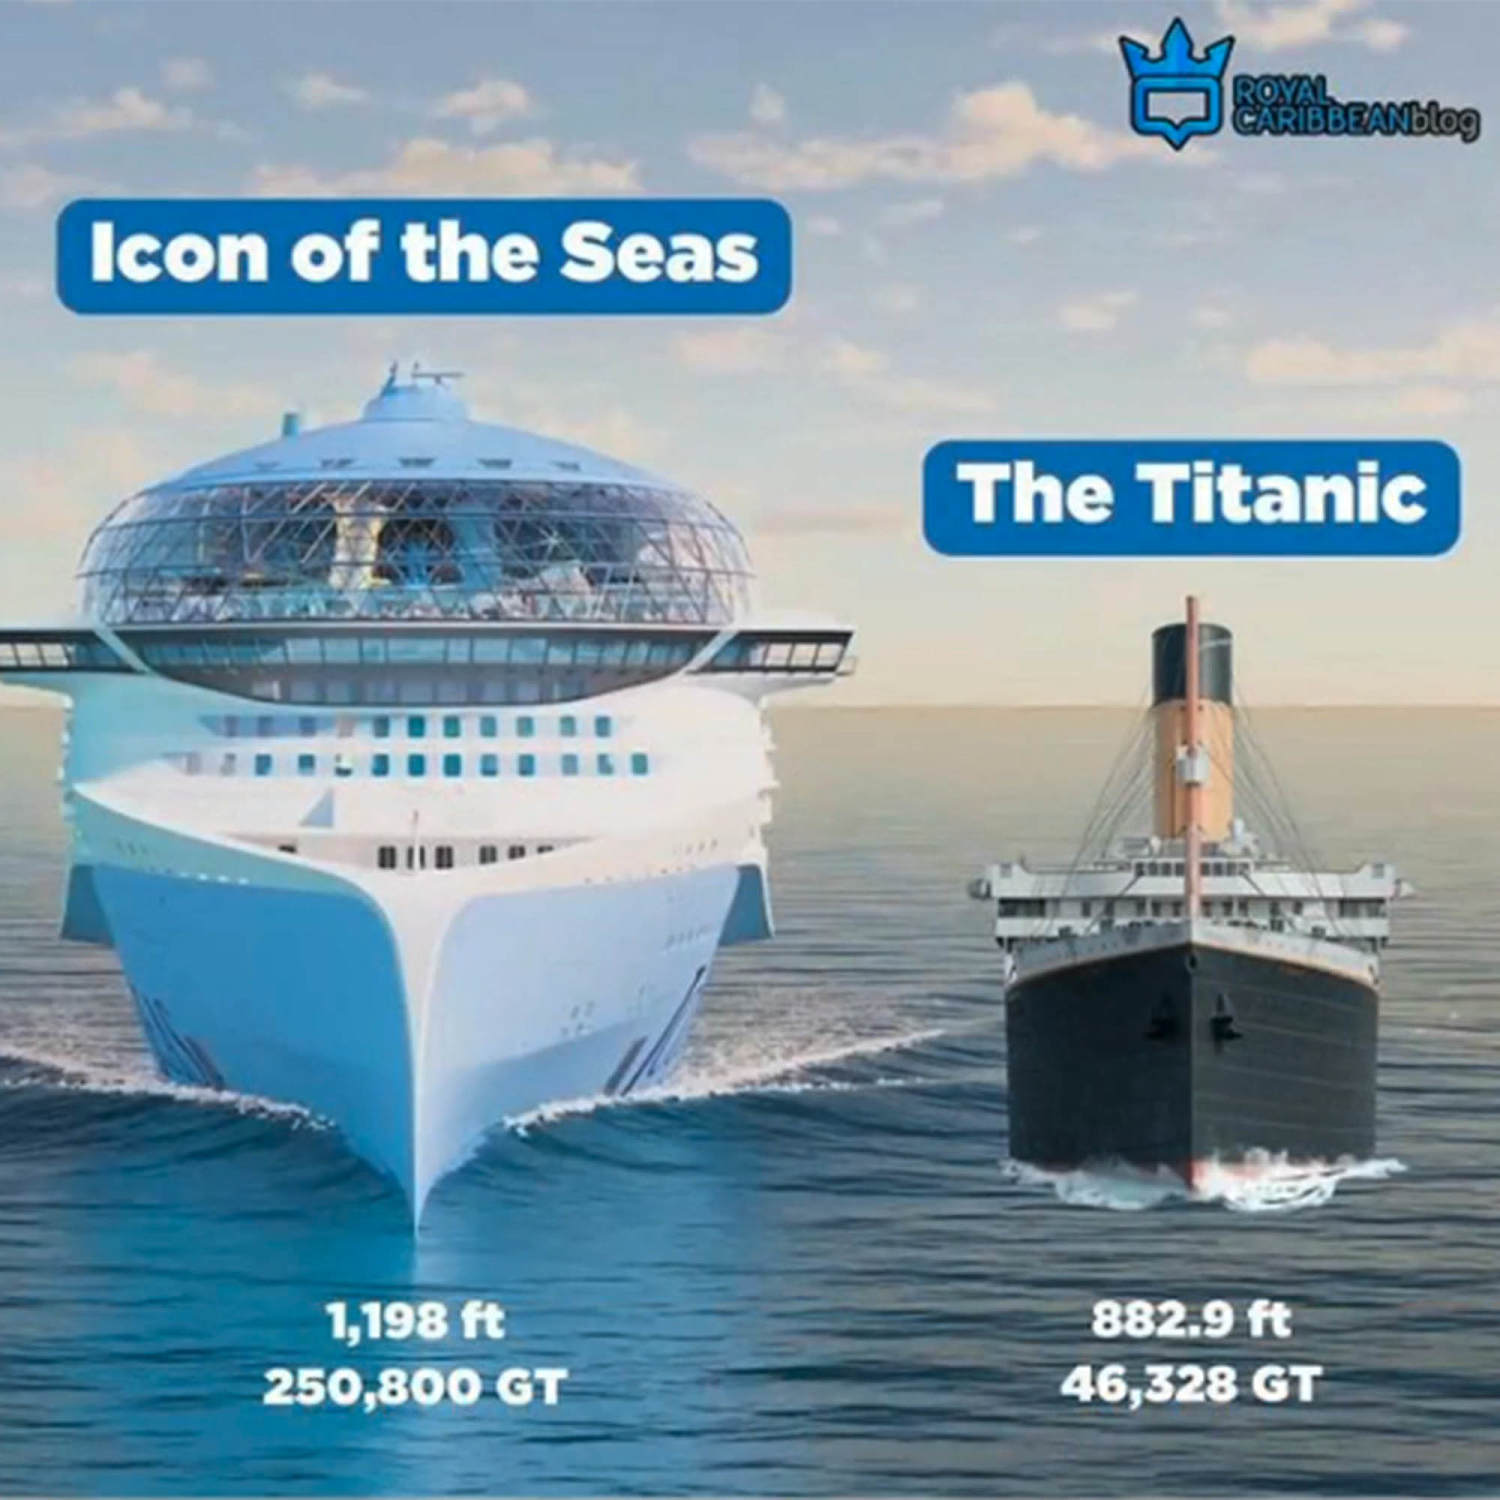 icon of the seas: everything you need to know about the largest cruise ship in the world